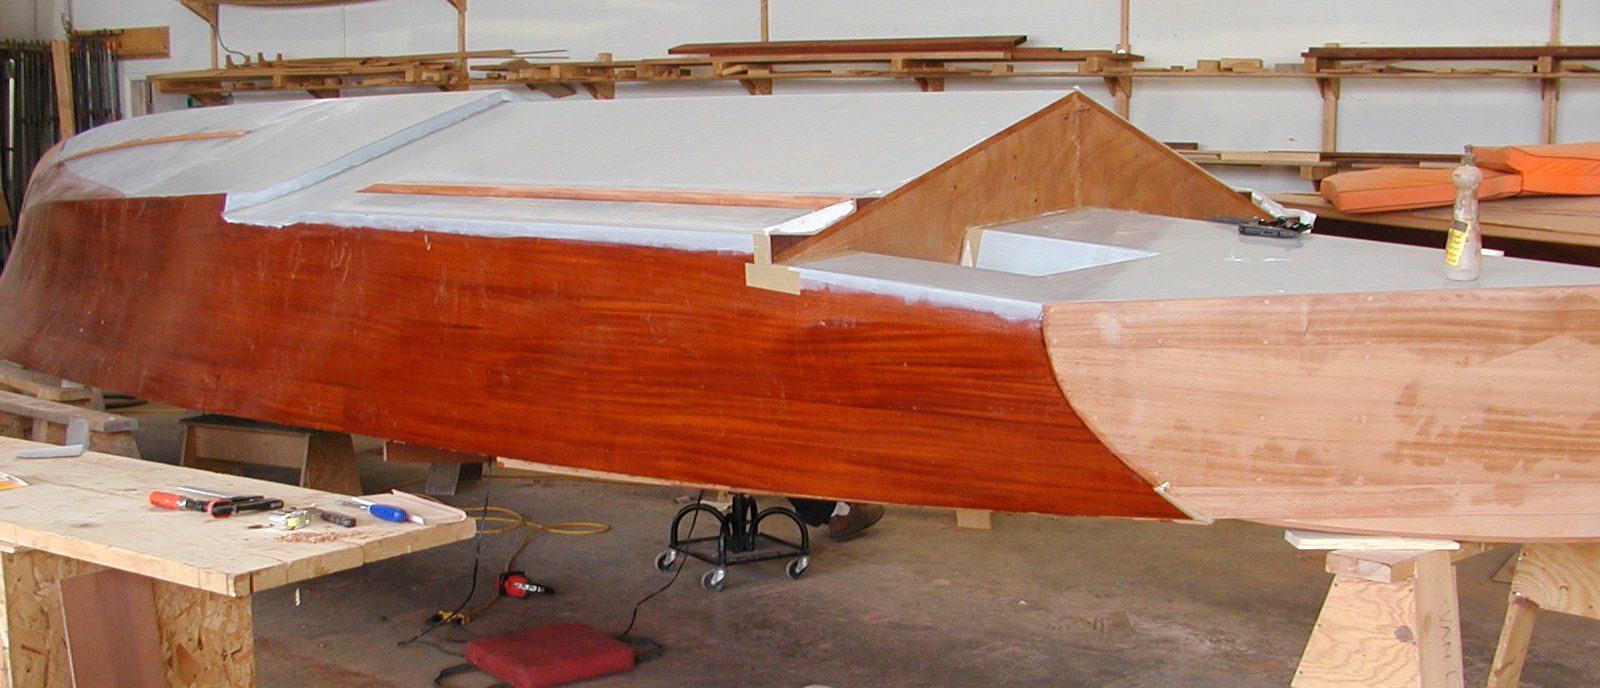 Applying fiberglass cloth to hull of Jacqueline before painting